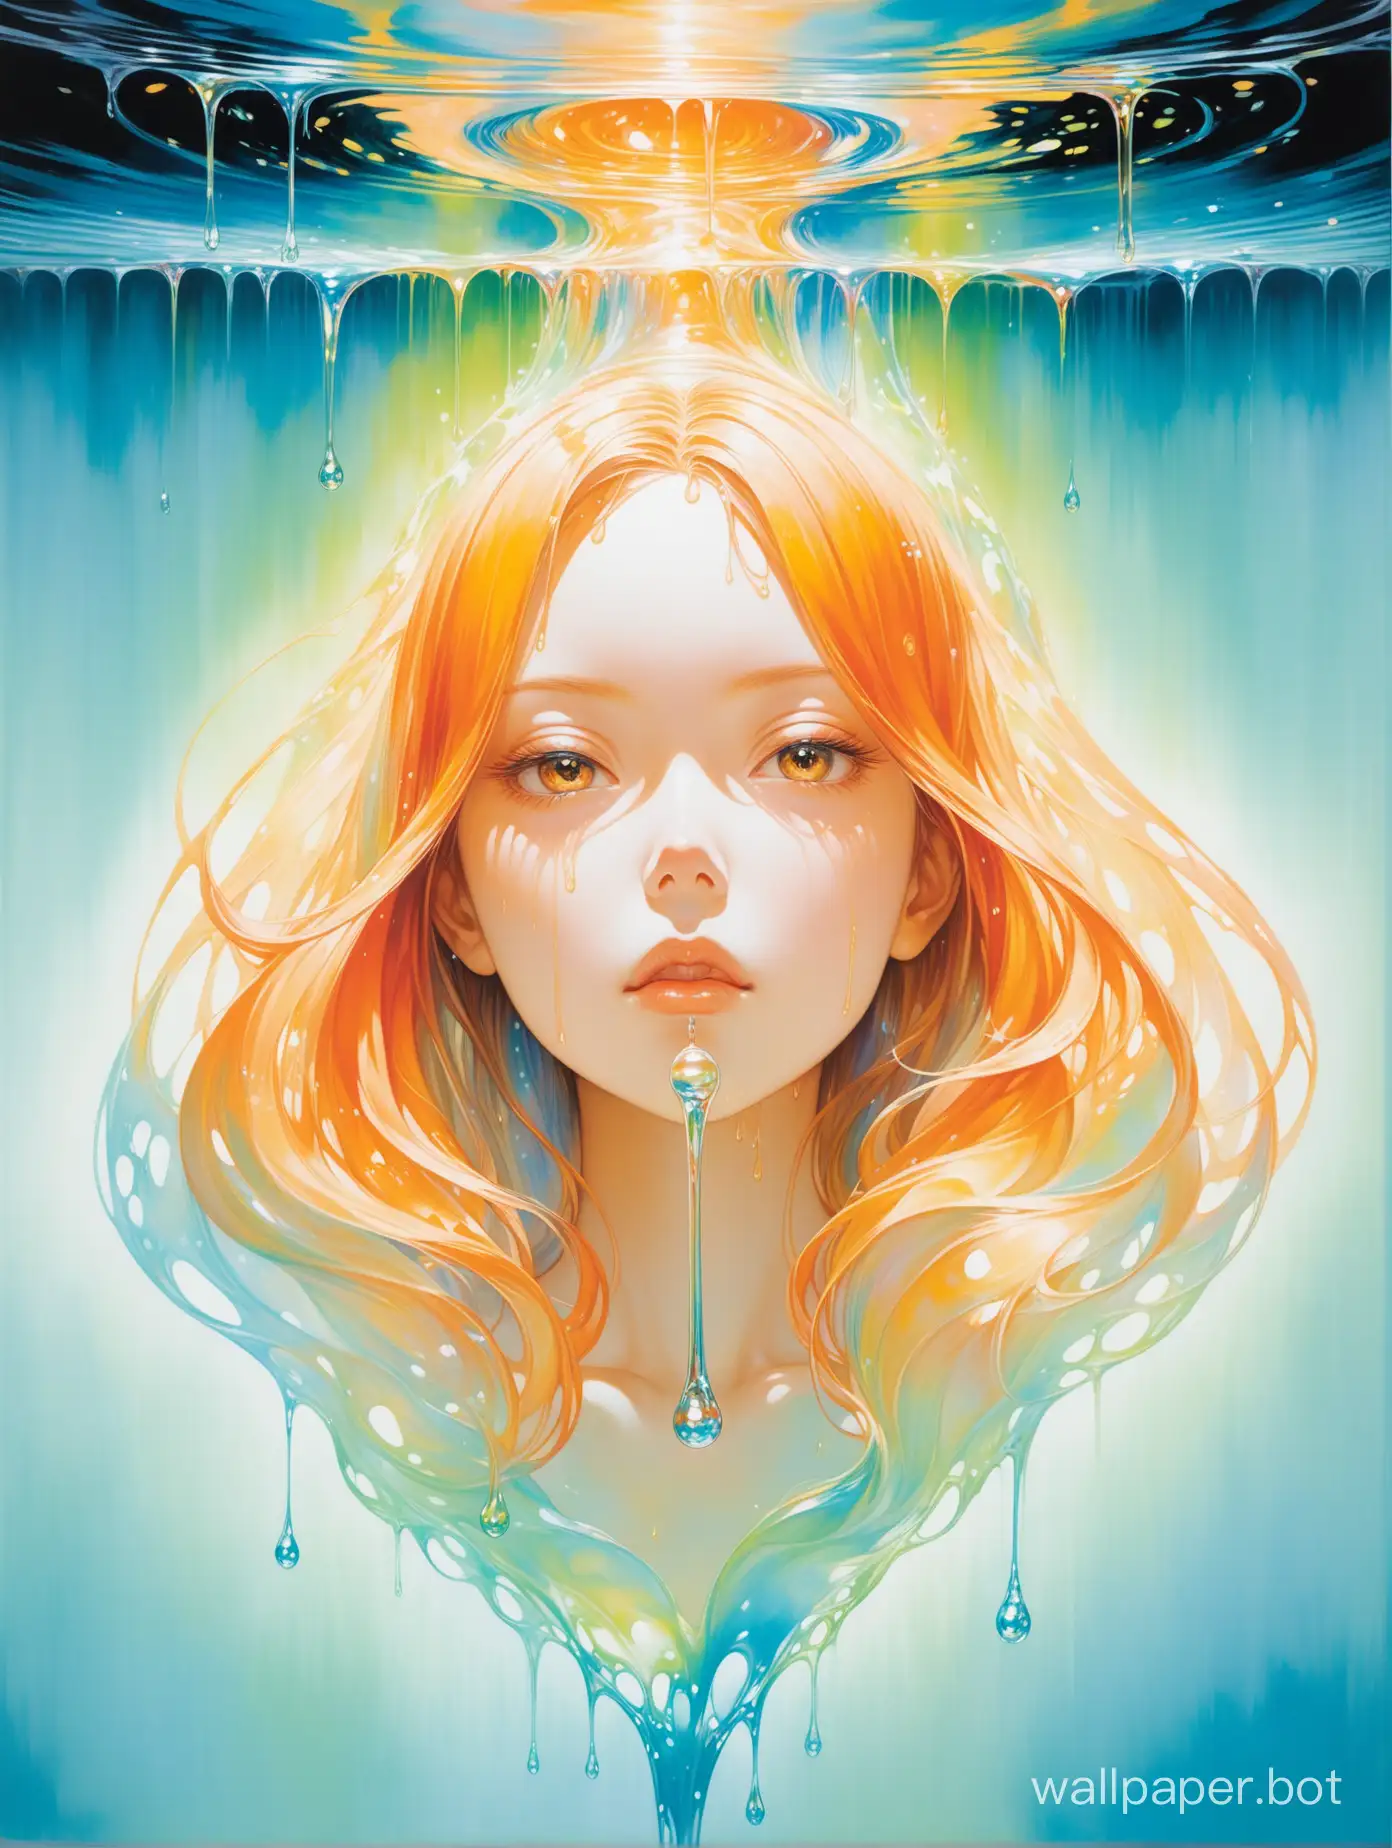 orangepaper, Make an image that explores the ethereal realm of fantasy and magic, creating mystical worlds filled with wonder. perfectly centred, neo-expressionist oil paint, from the bottom of a dripping bottle deep posing portrait by hajime sorayama